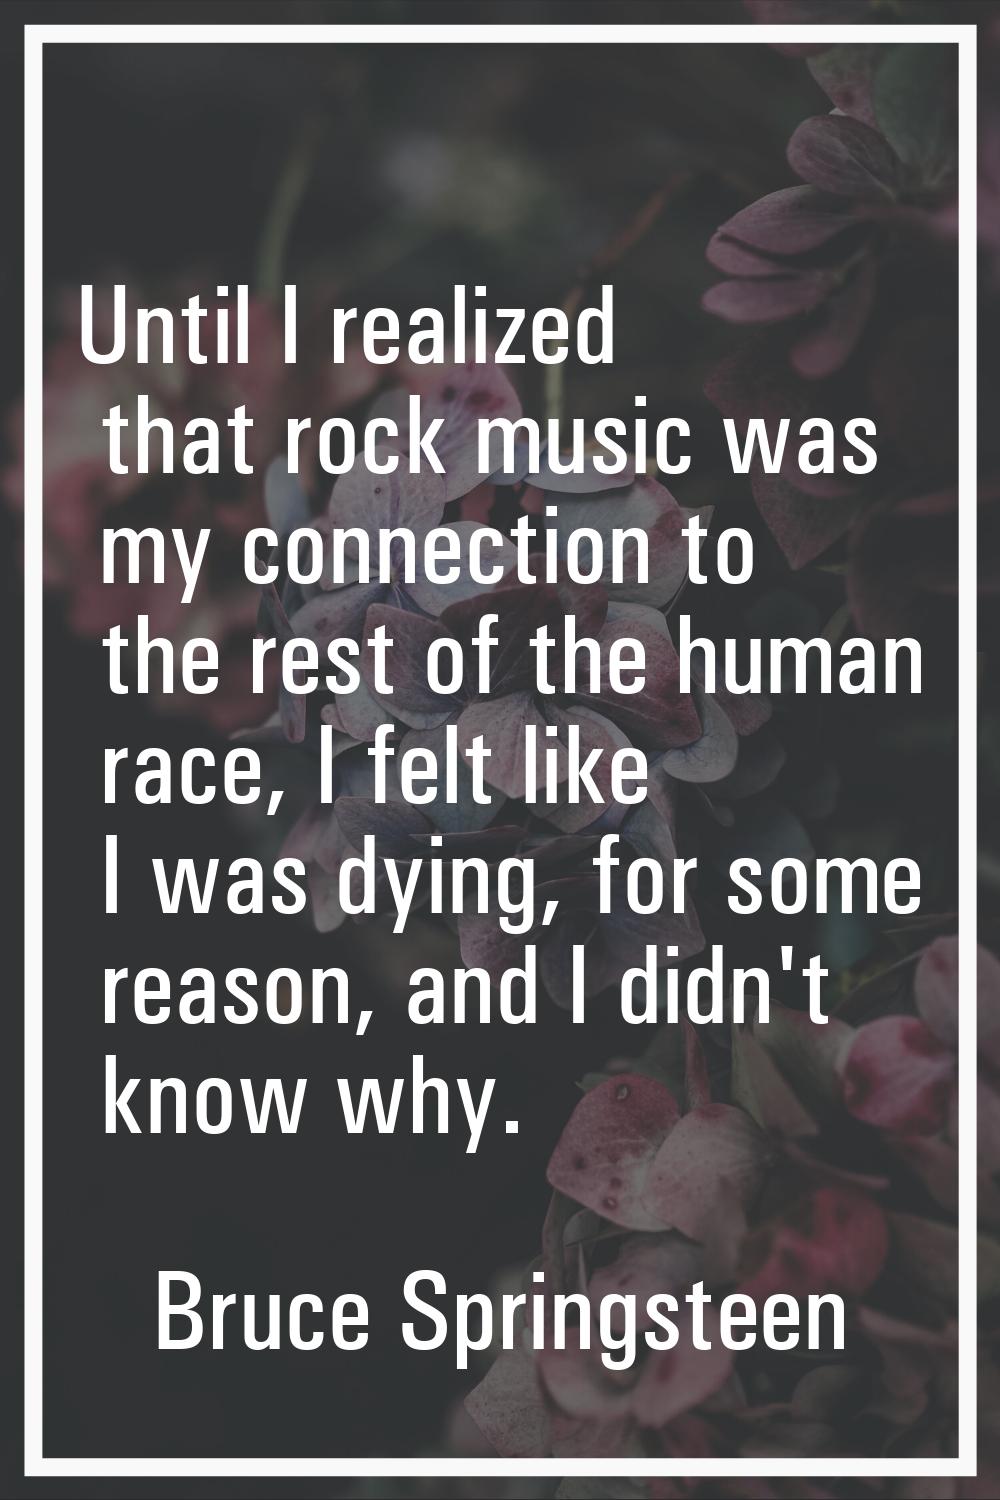 Until I realized that rock music was my connection to the rest of the human race, I felt like I was